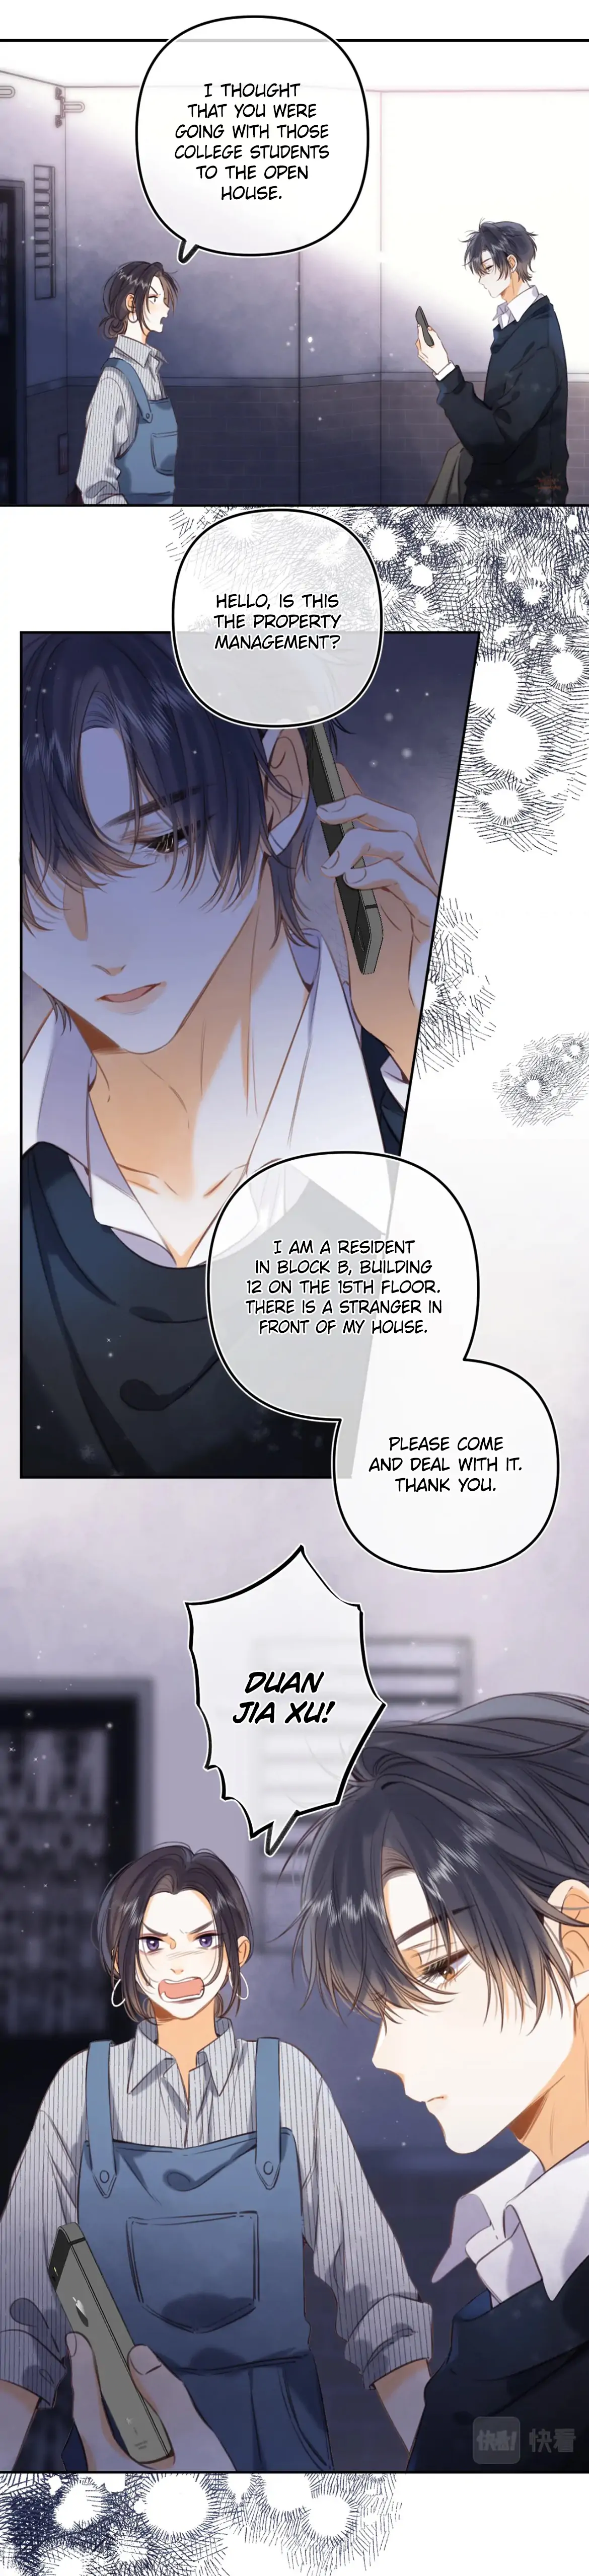 Hidden Love: Can - 59 page 13-3ae78c35